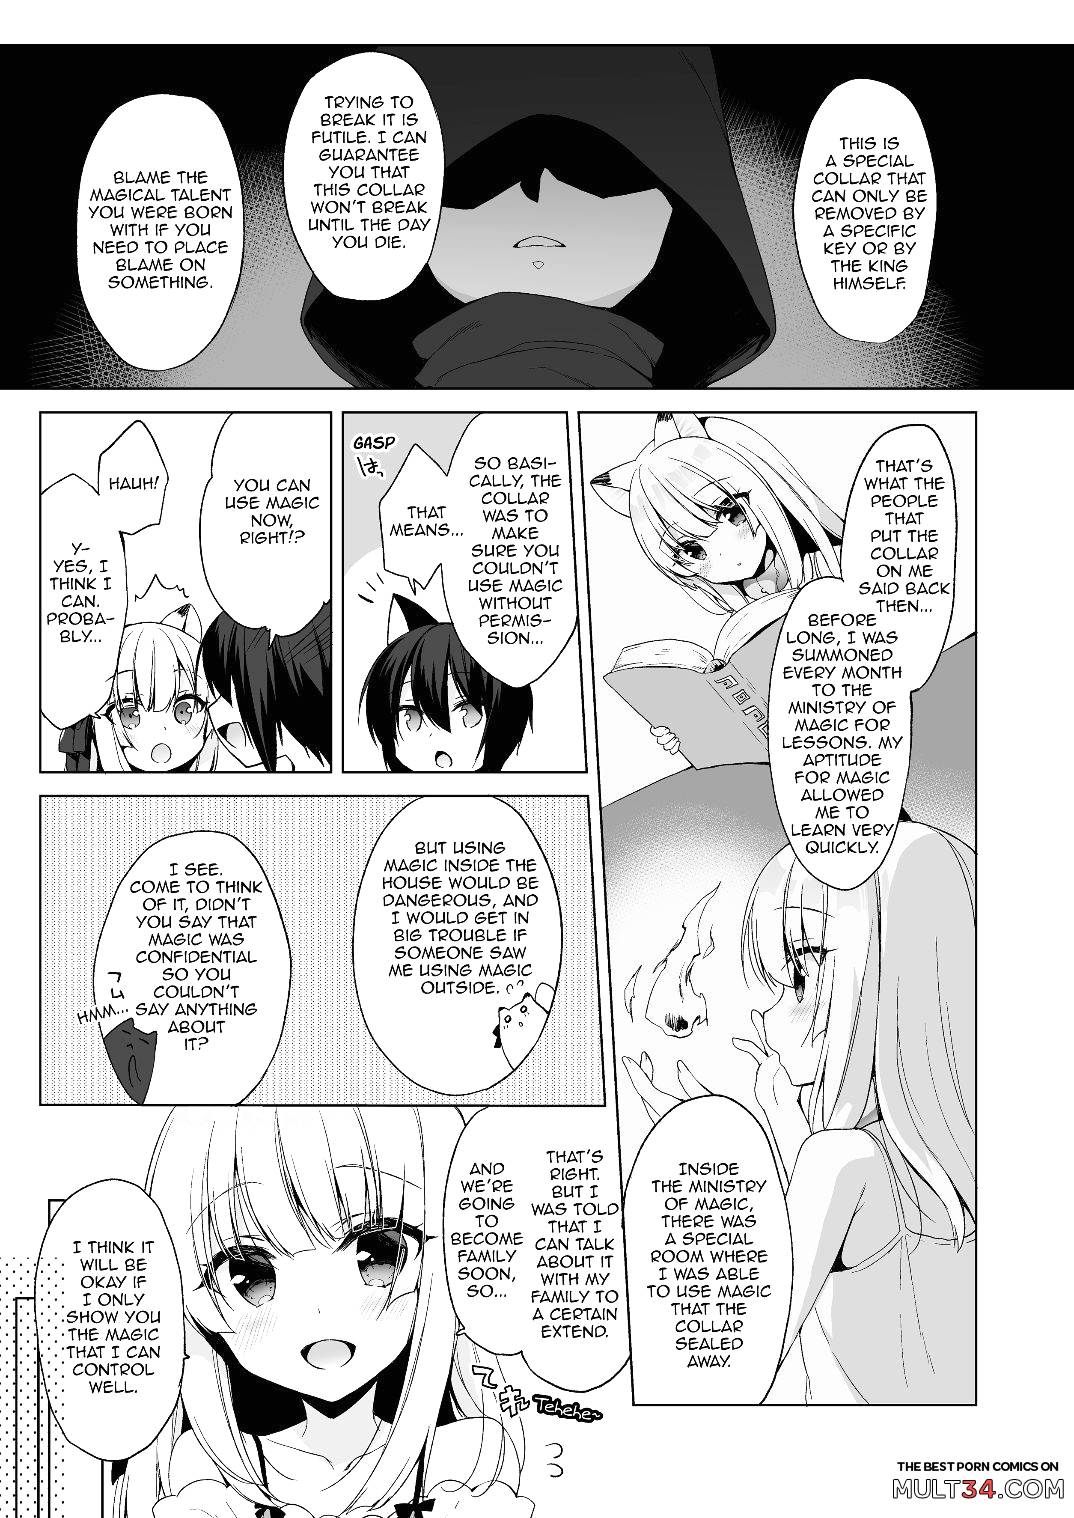 My Ideal Life in Another World Vol 4 page 4